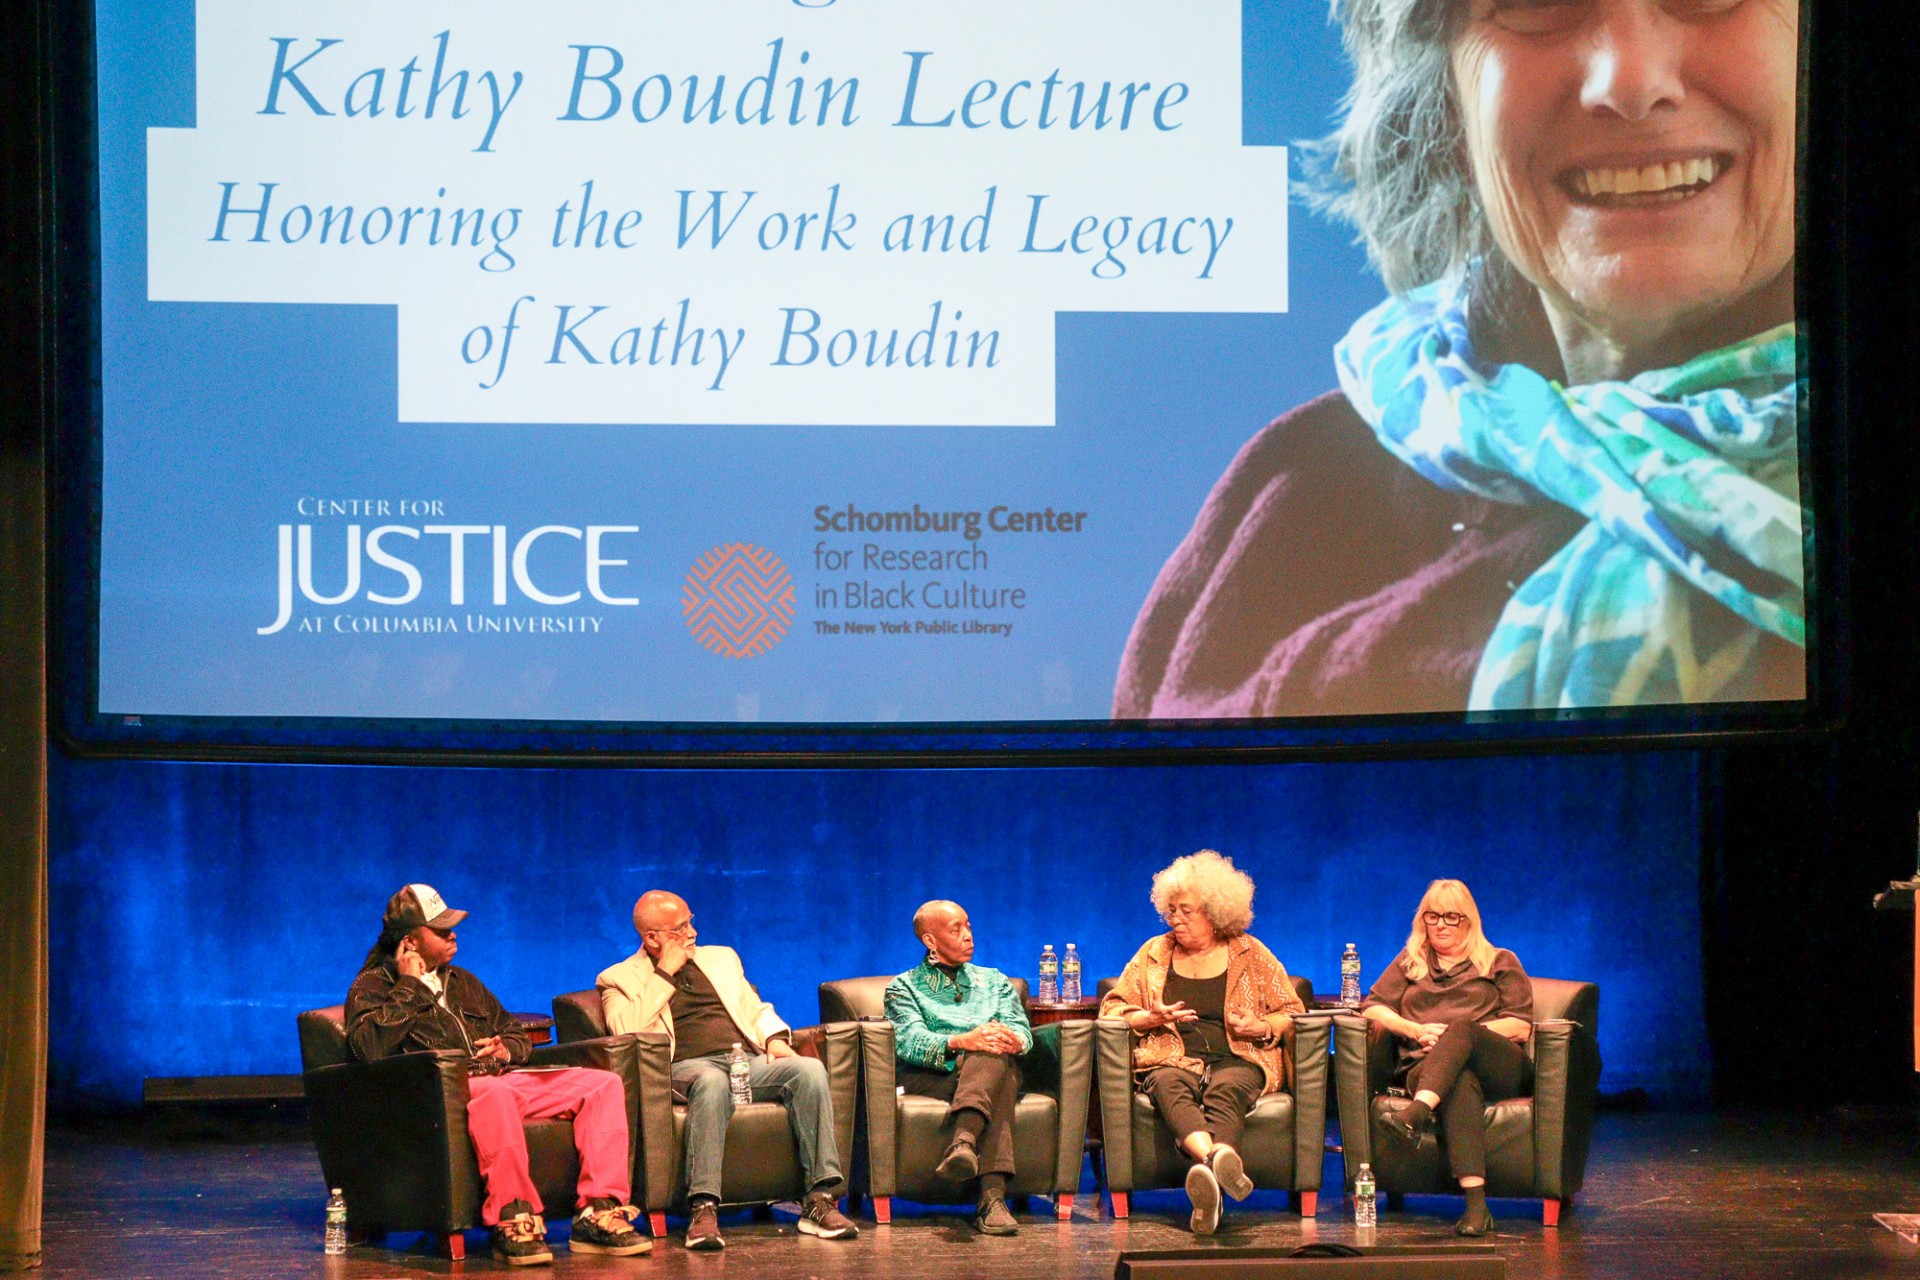 Picture of the panelists sitting on chairs on stage with an image of Kathy on the screen behind them